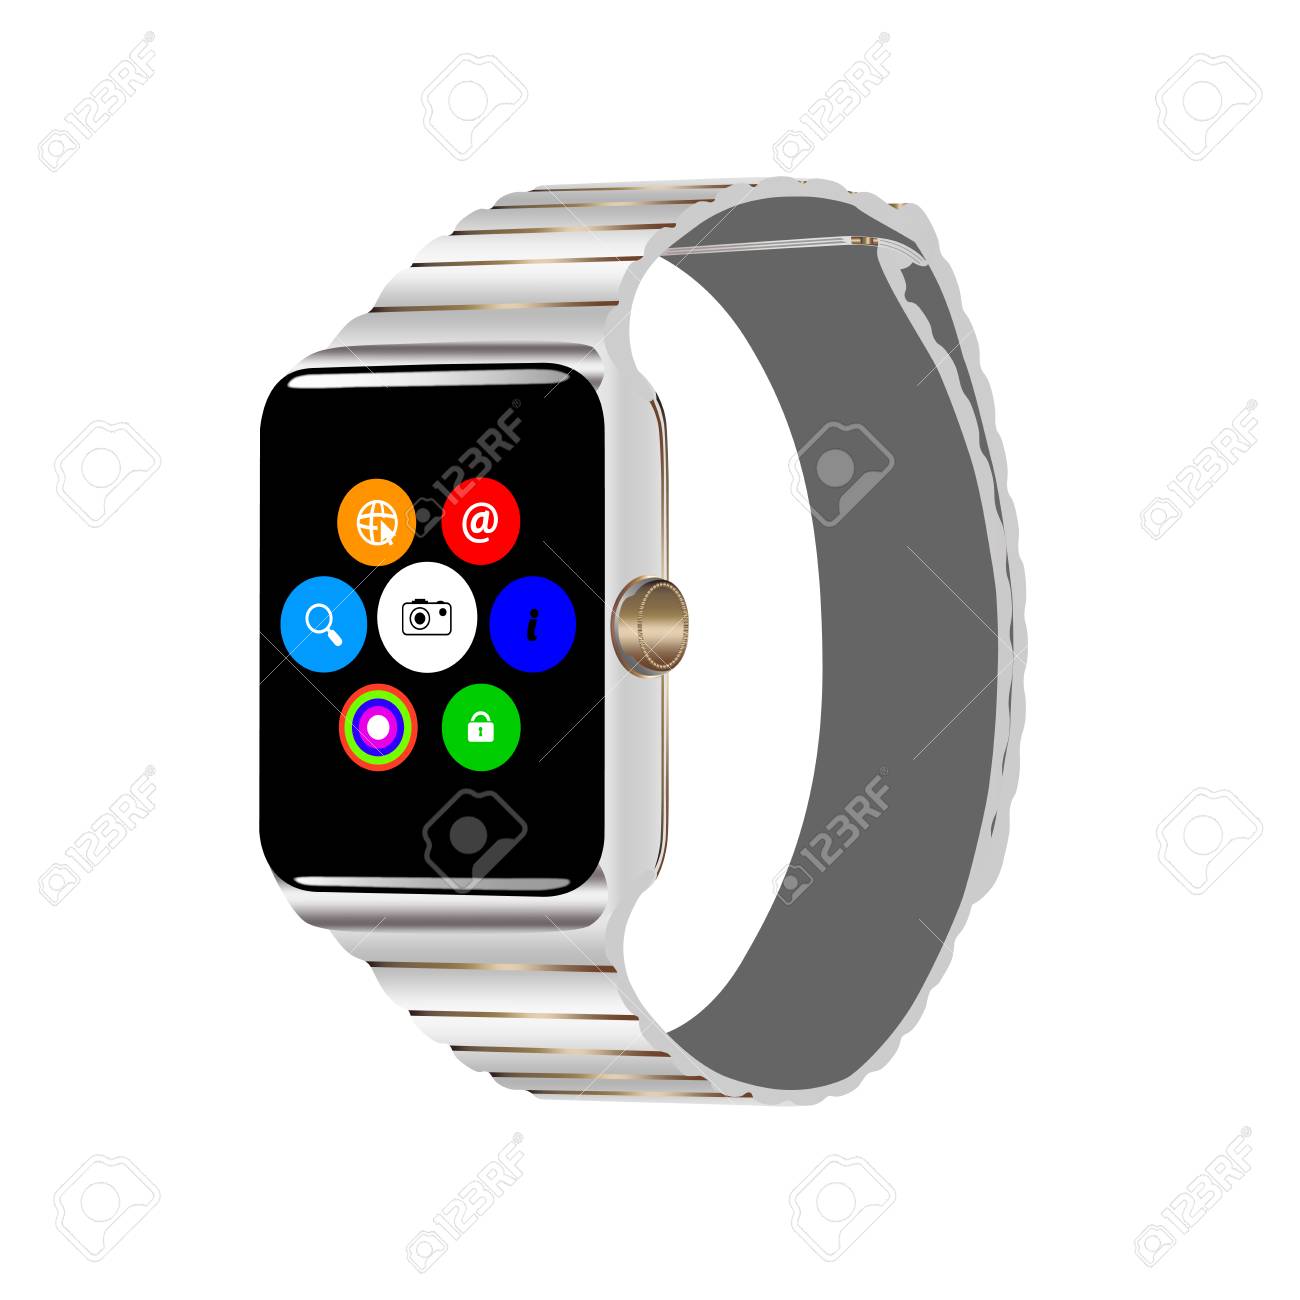 Touch Smart Watch In Vector On White Background